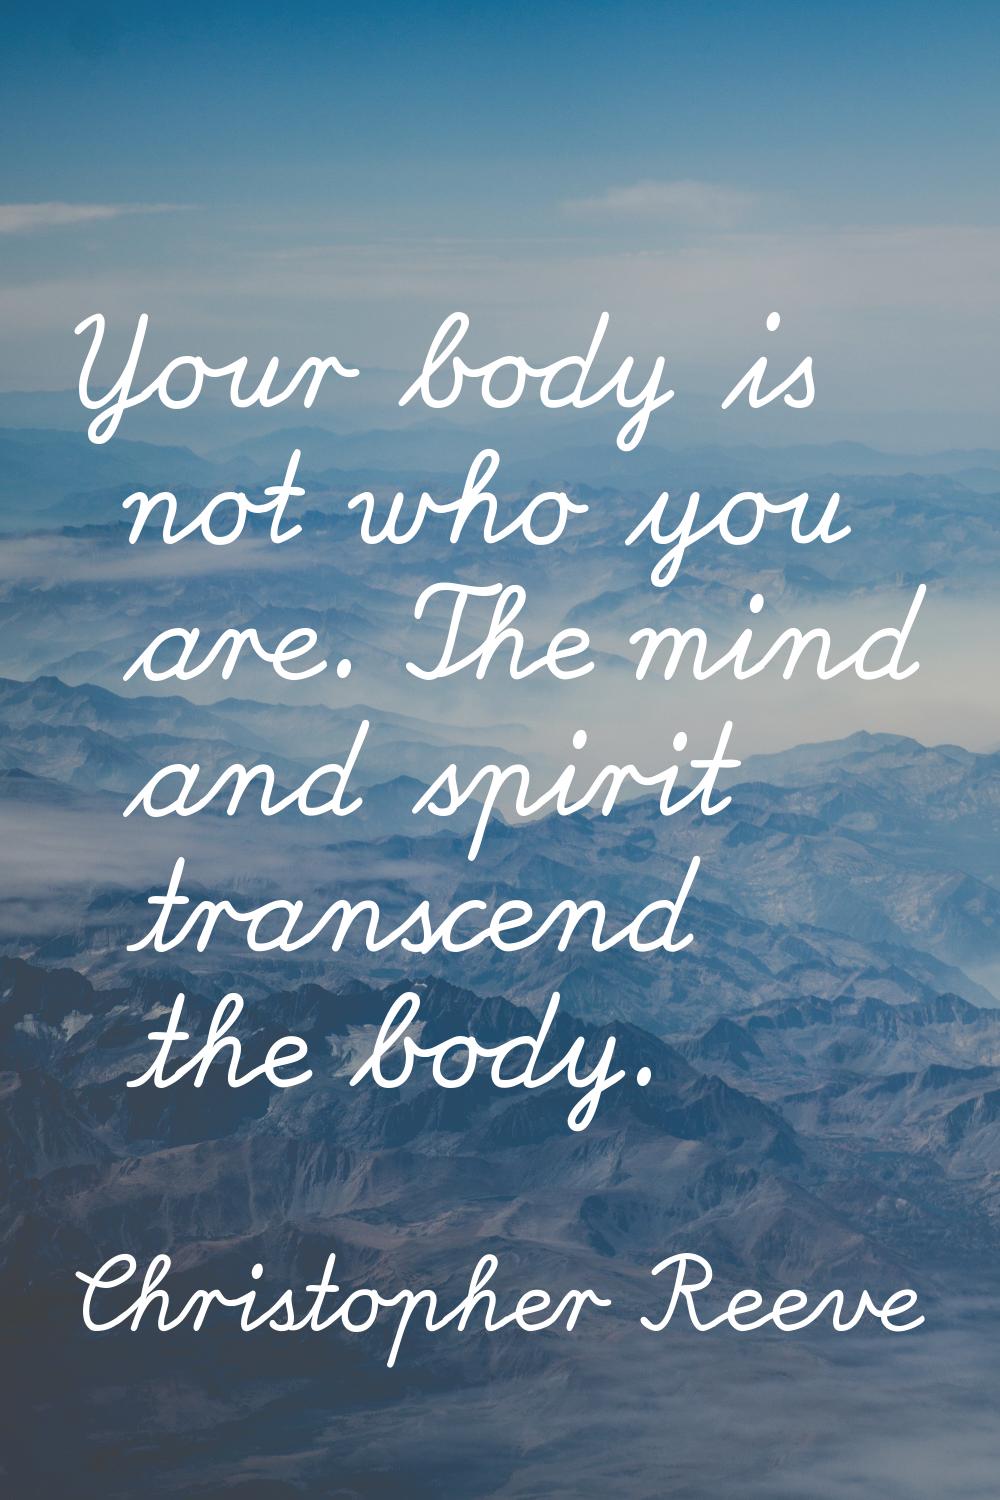 Your body is not who you are. The mind and spirit transcend the body.